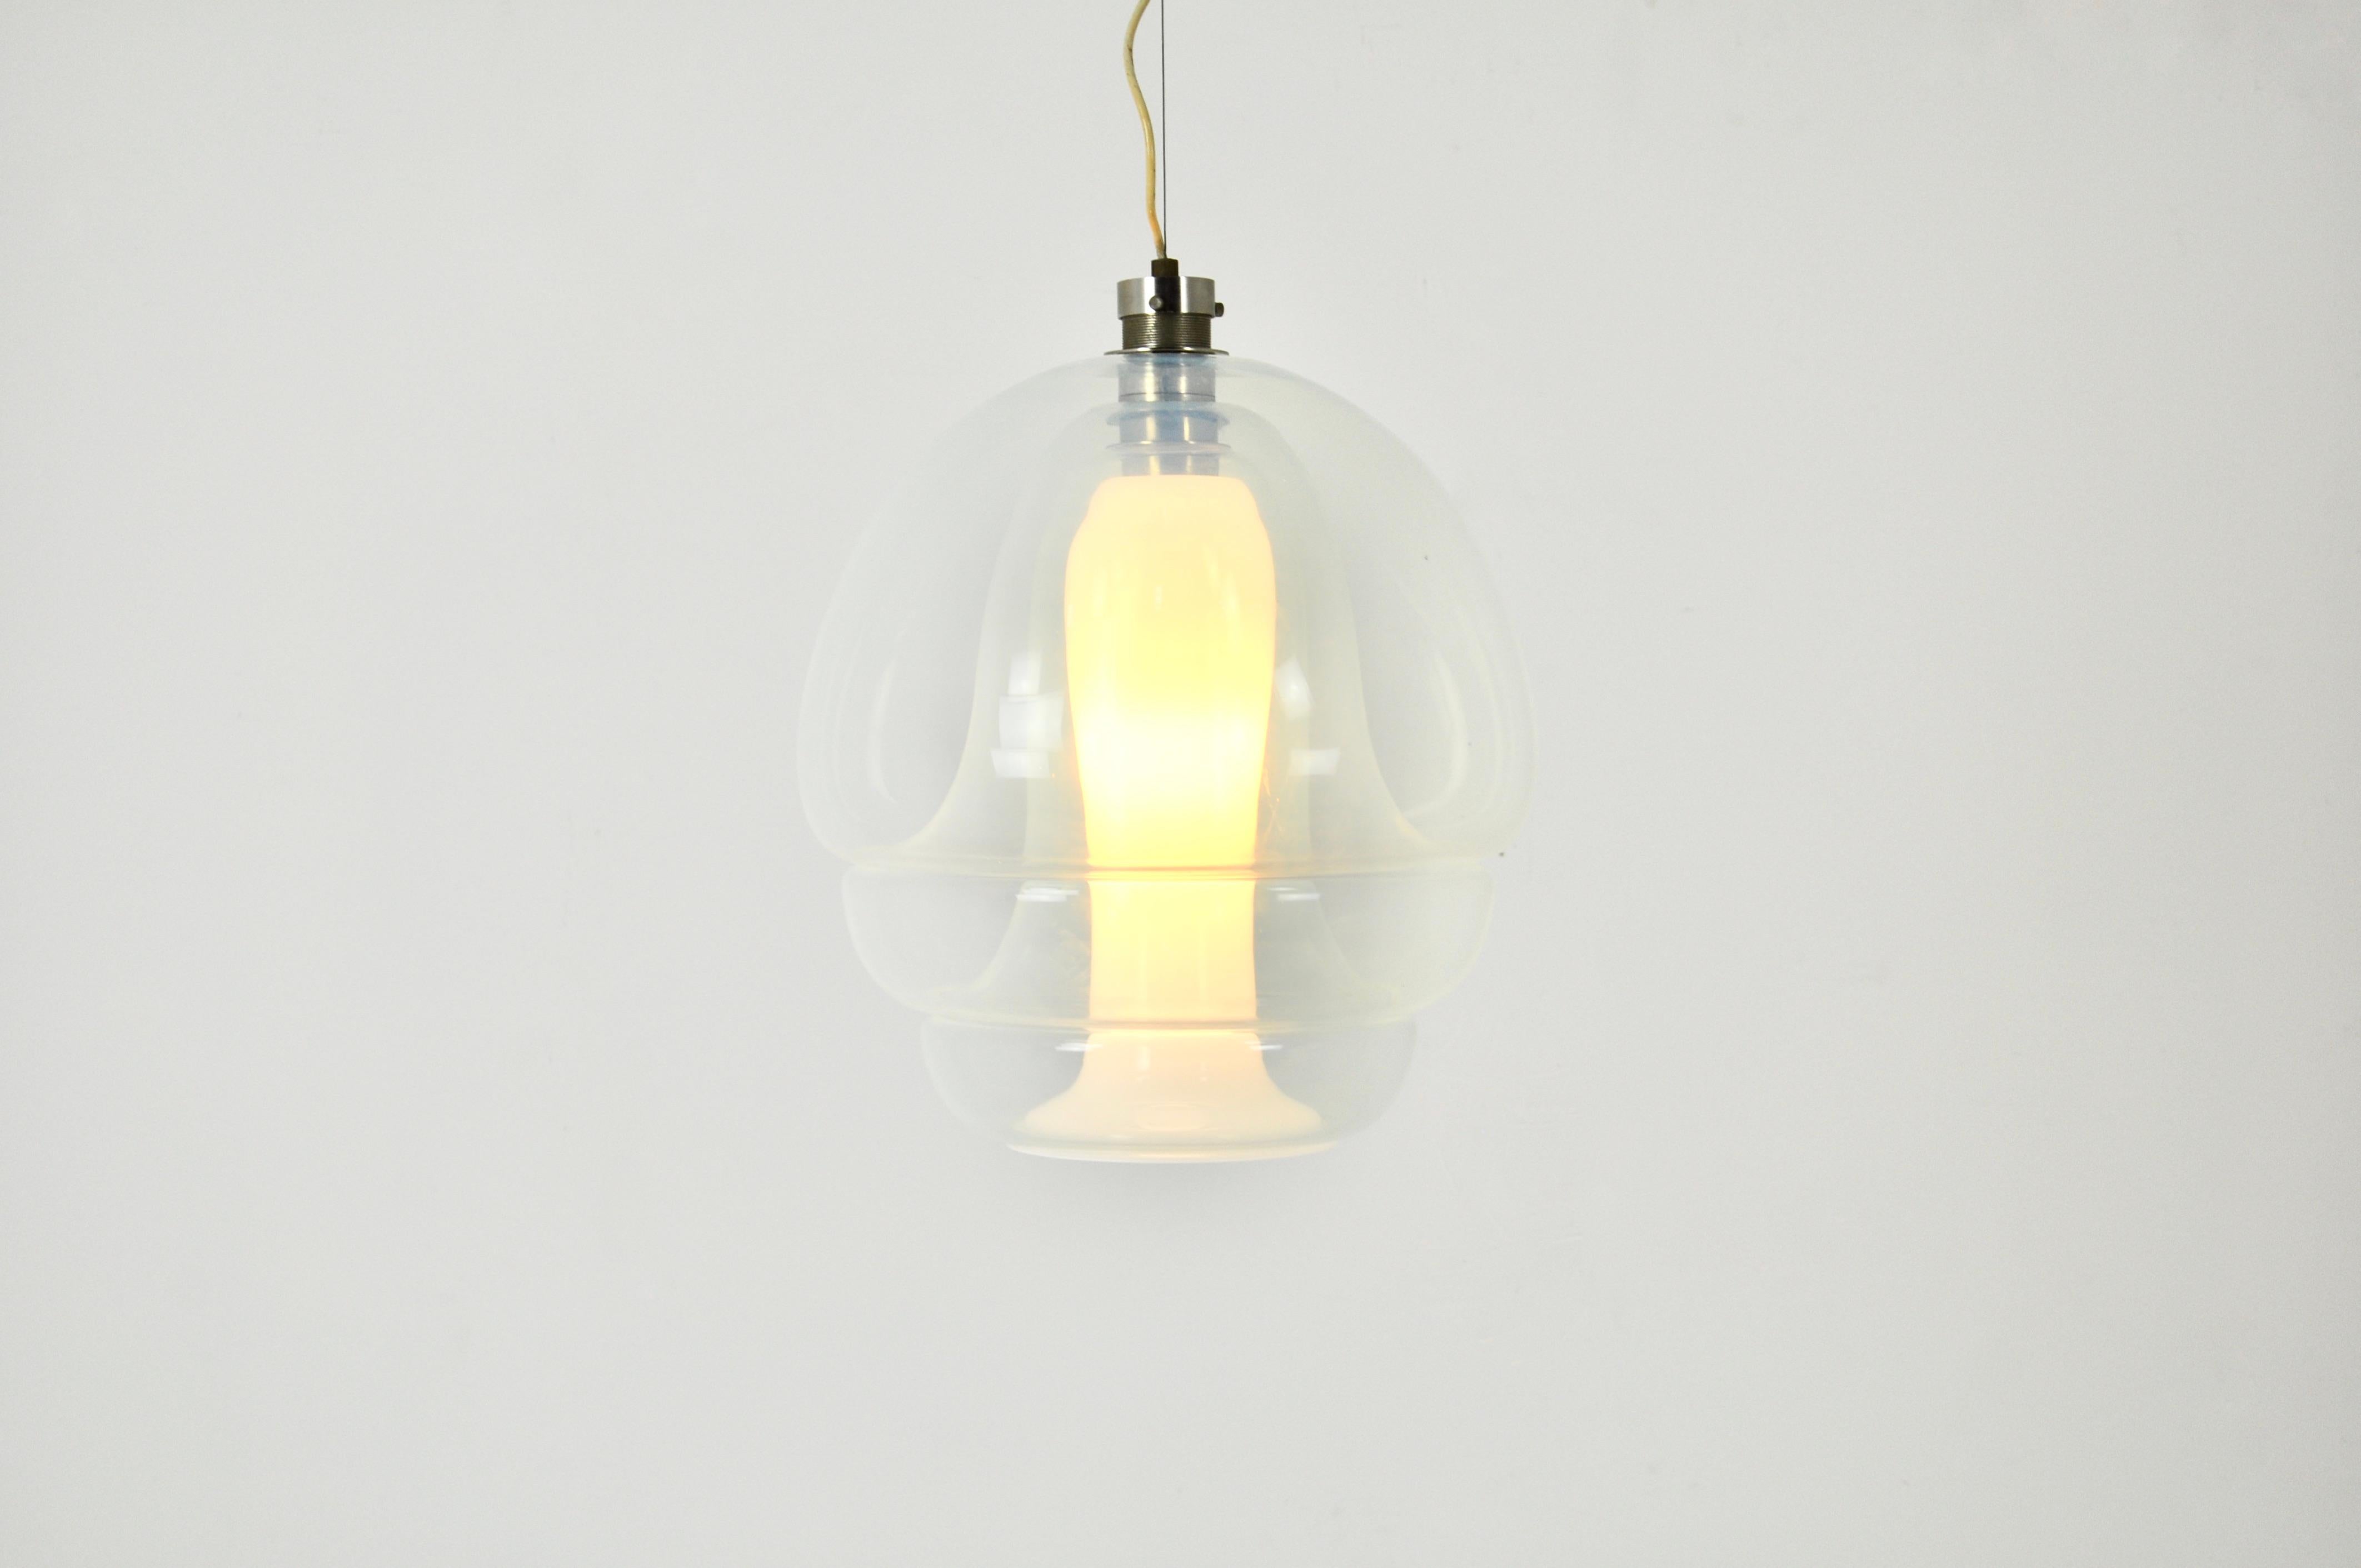 Hanging lamp in transparent glass. Adjustable height. Wear due to time and age of the chandelier.